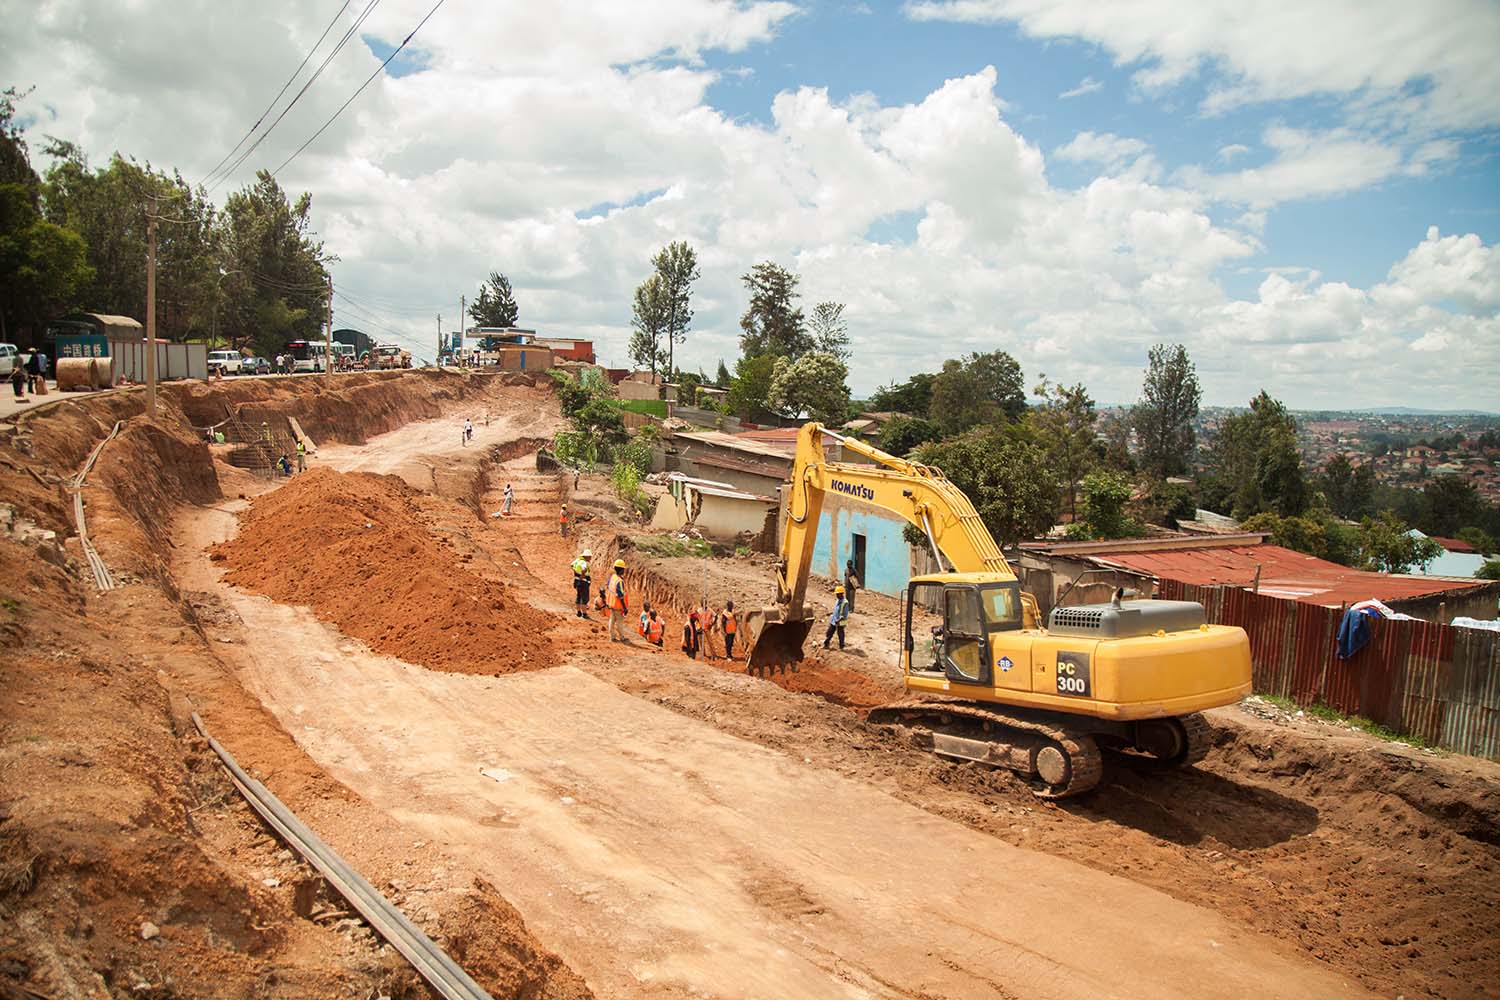 A grader during the expansion works on Remera-Rwandex-Kanogo road. It is one of the Kigali city roads set to be completed by December, according to authorities. Nadege Imbabazi.